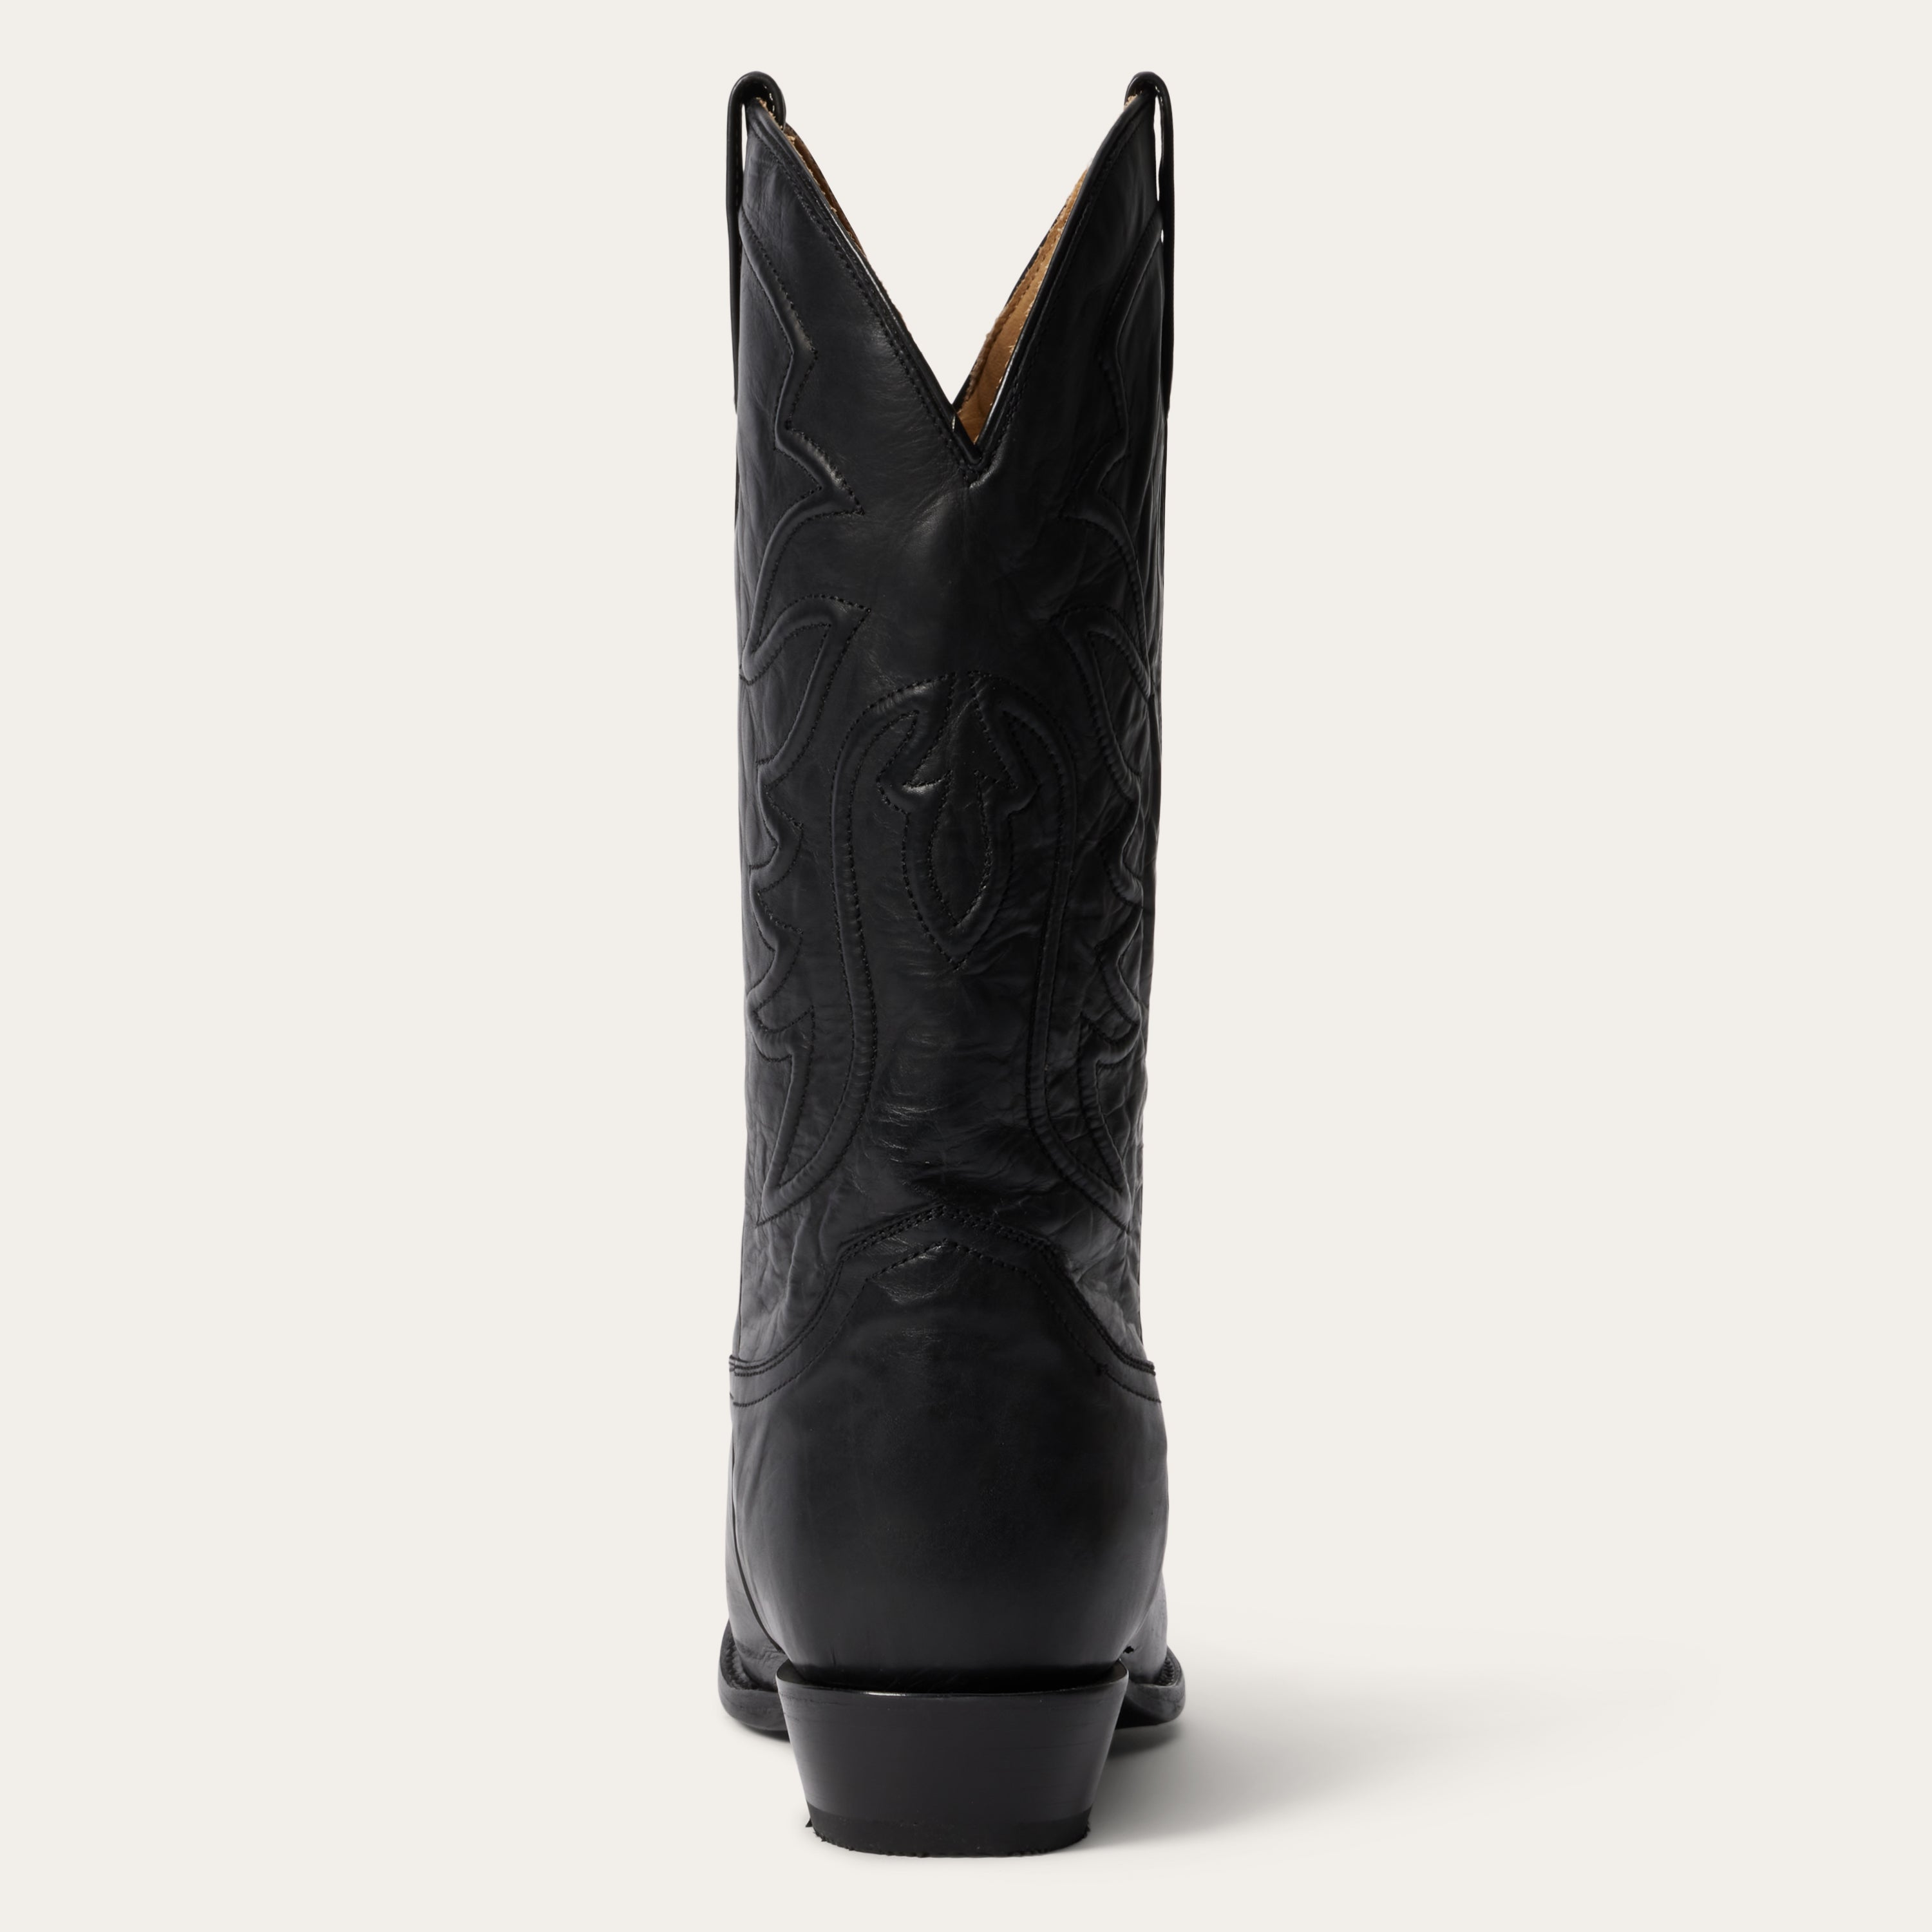 Stetson Ames Corded & Burnished Leather Boot